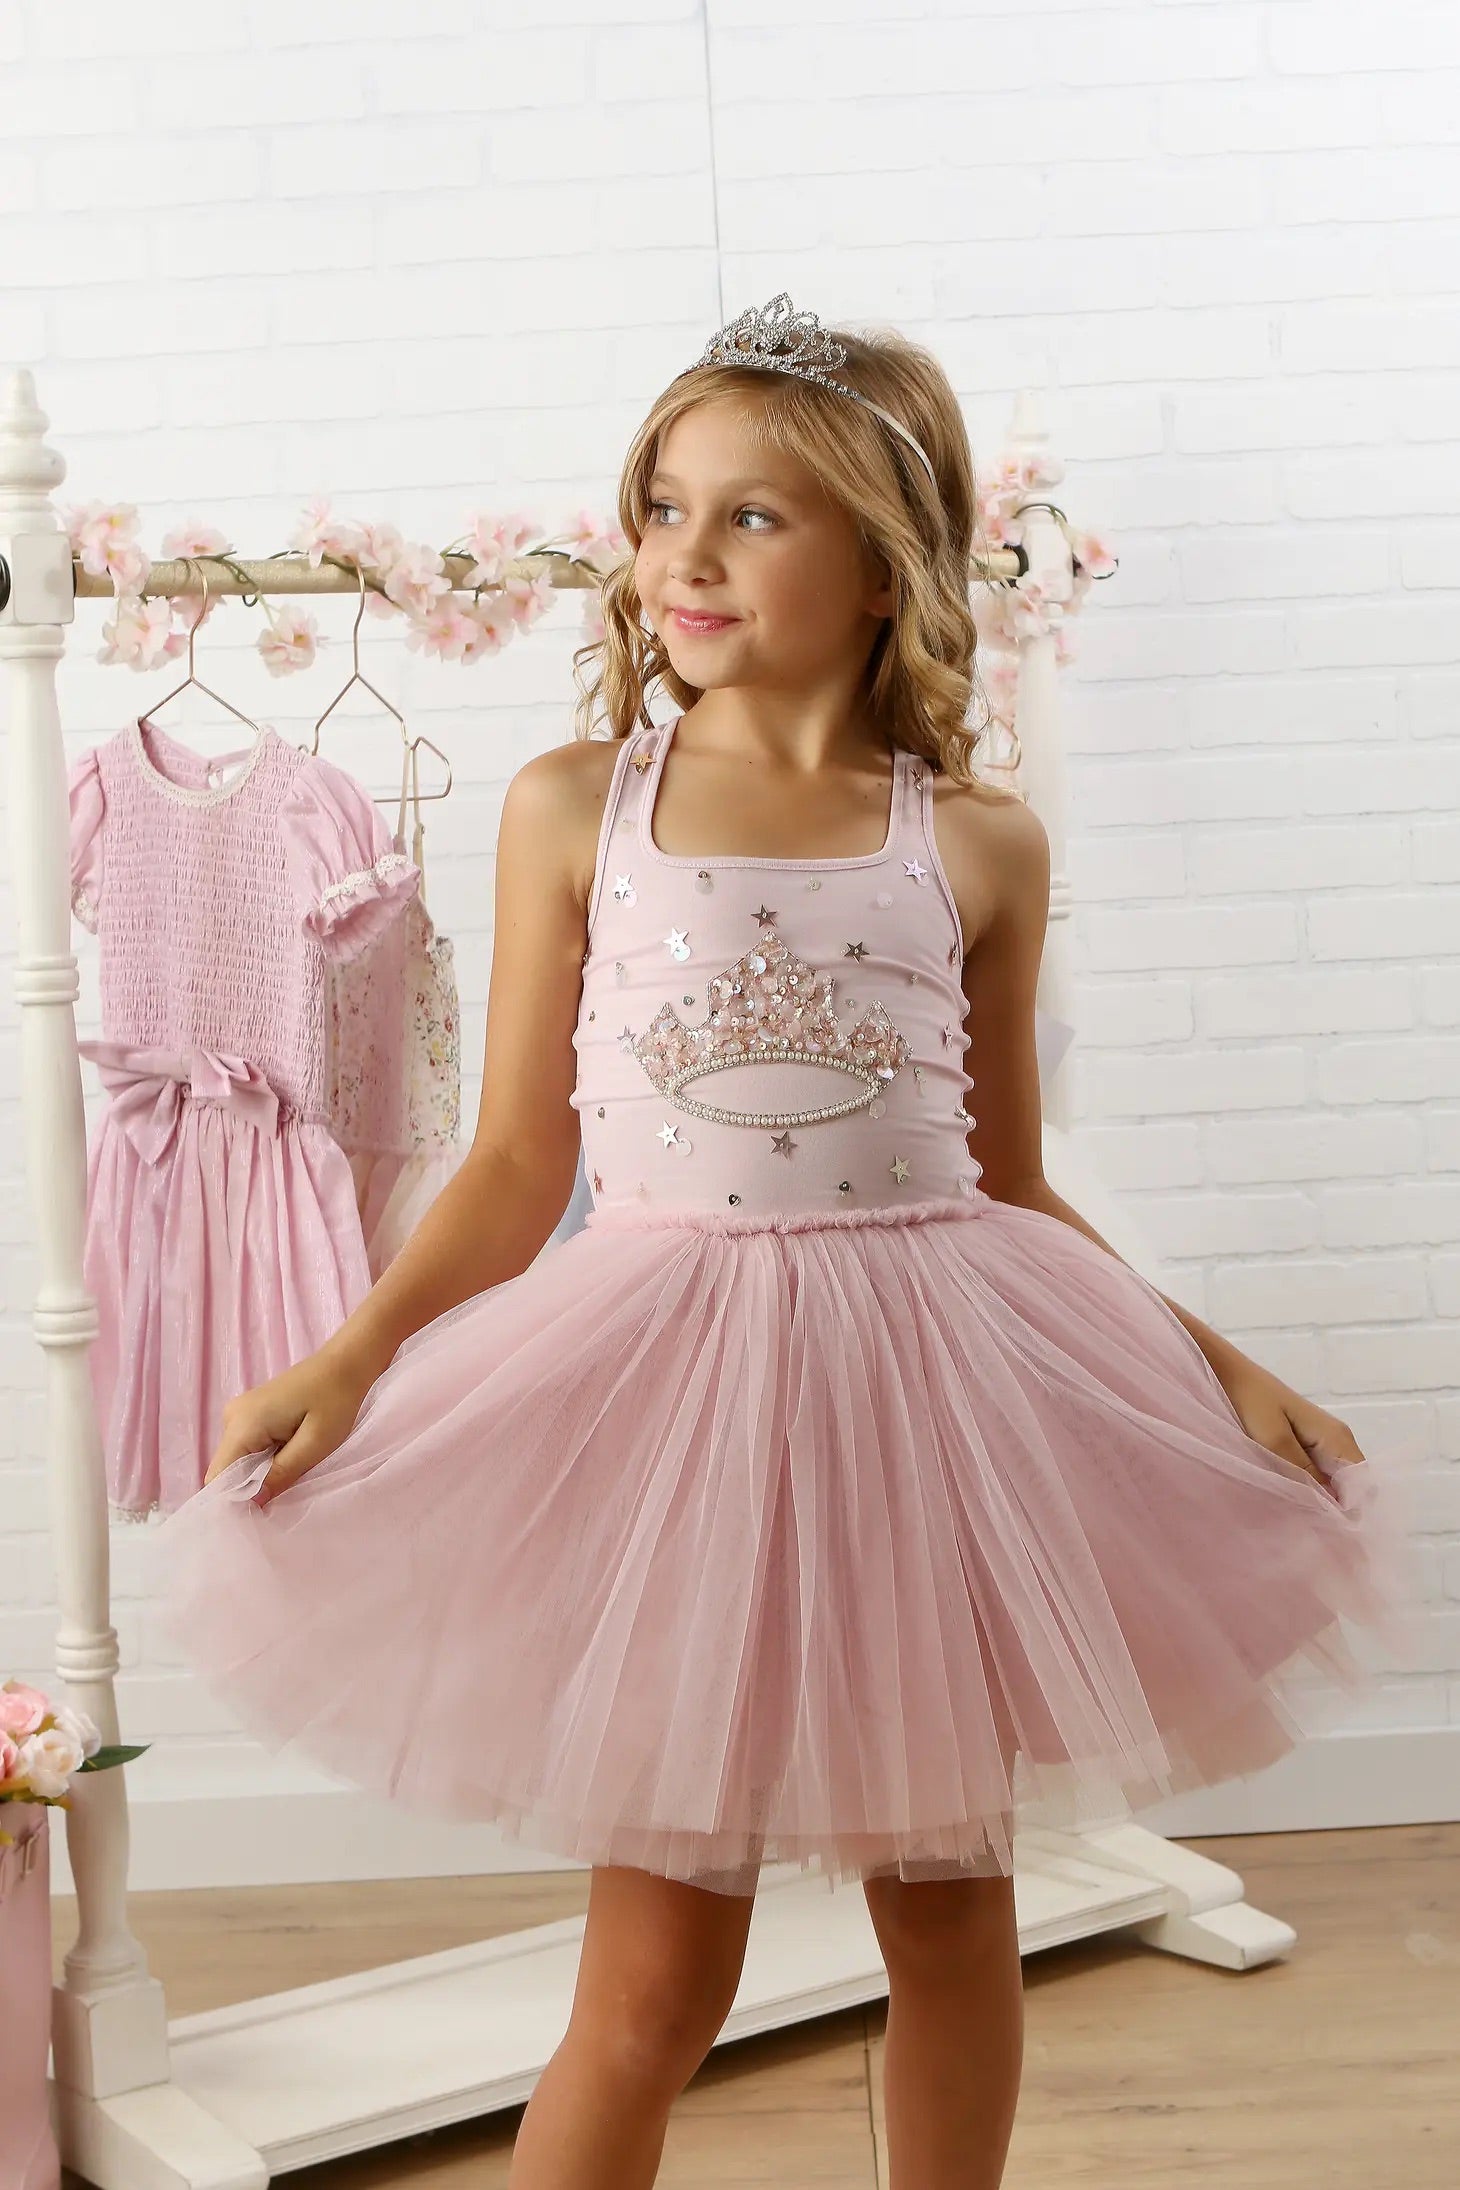 Tiara Crown Tutu Dress - Ooh La La Couture - Princess 12 Months by Liam and Lilly